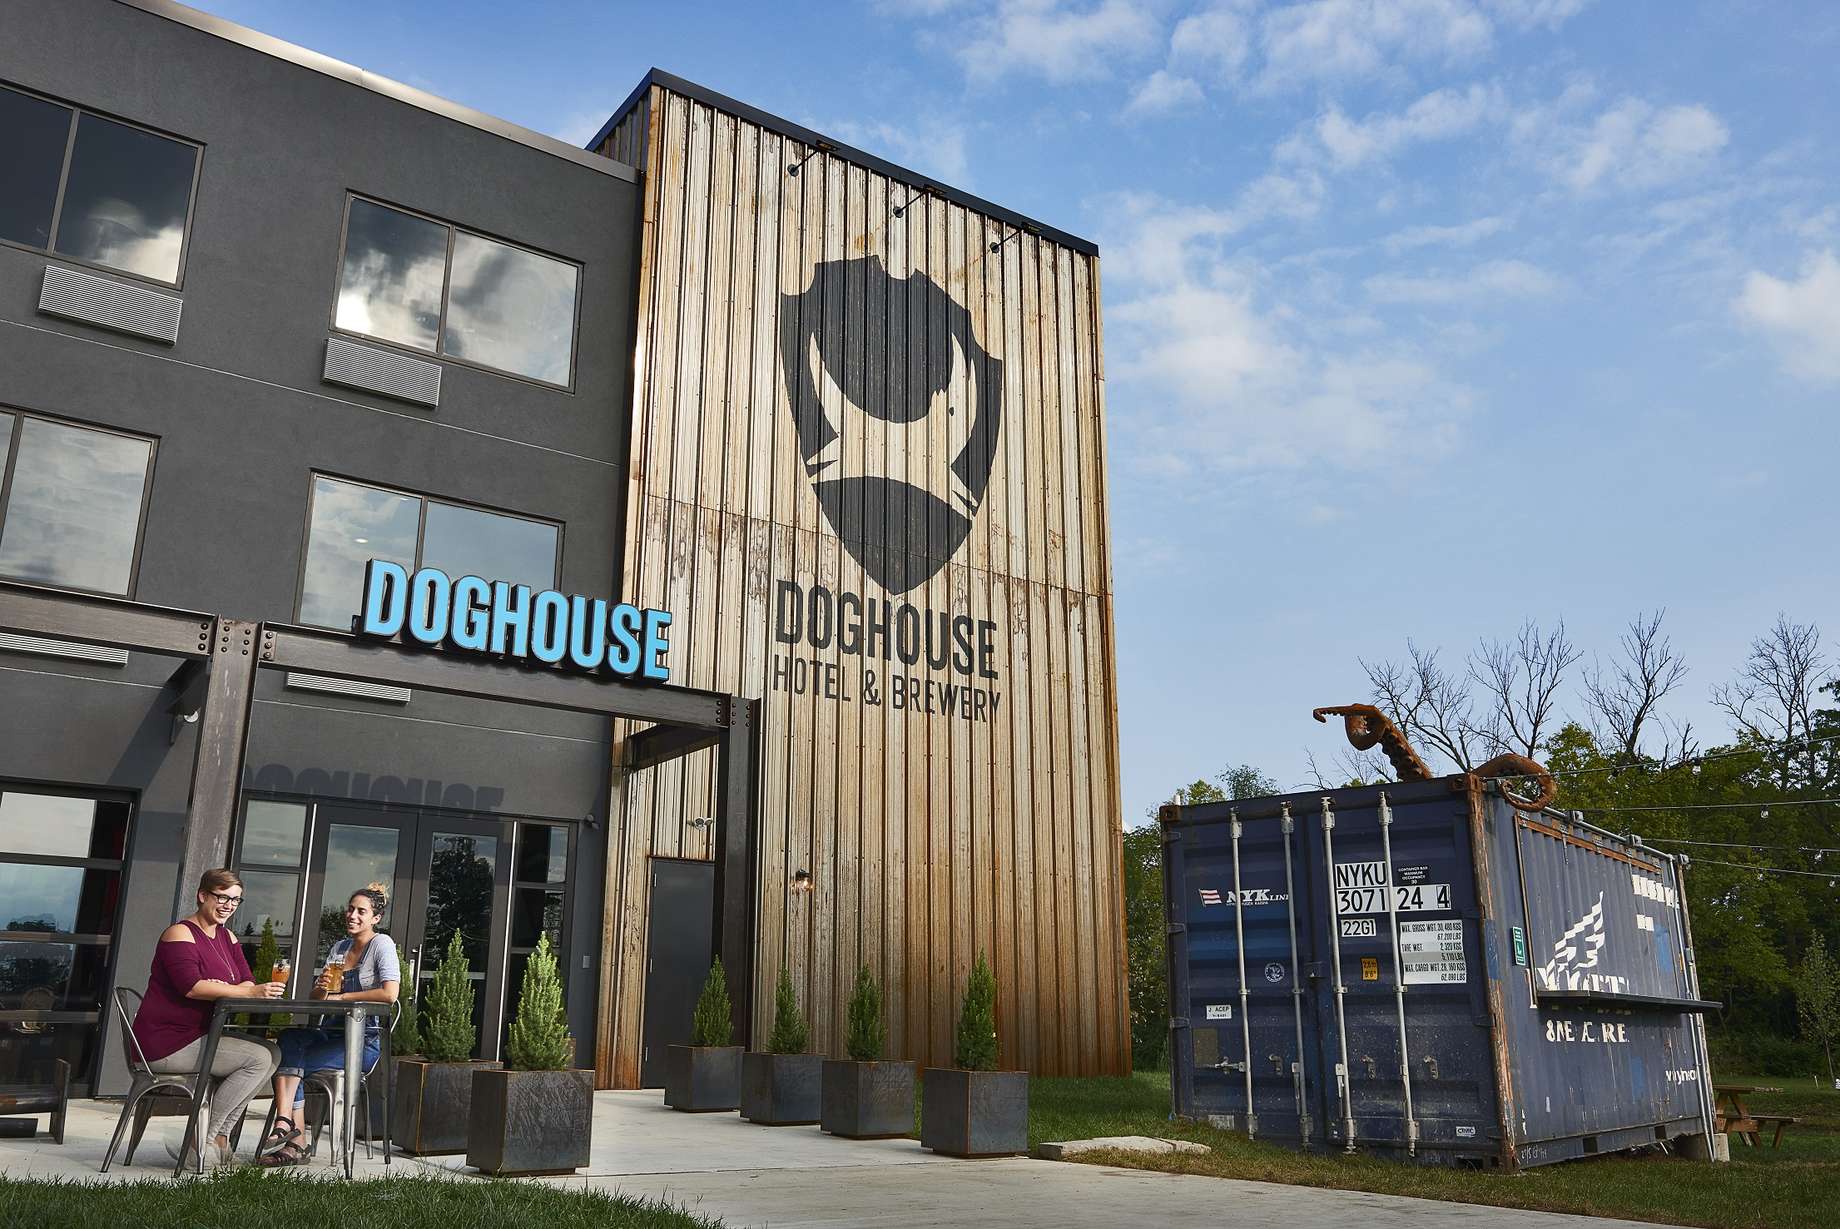 World’s First Beer Hotel: world record set by The DogHouse